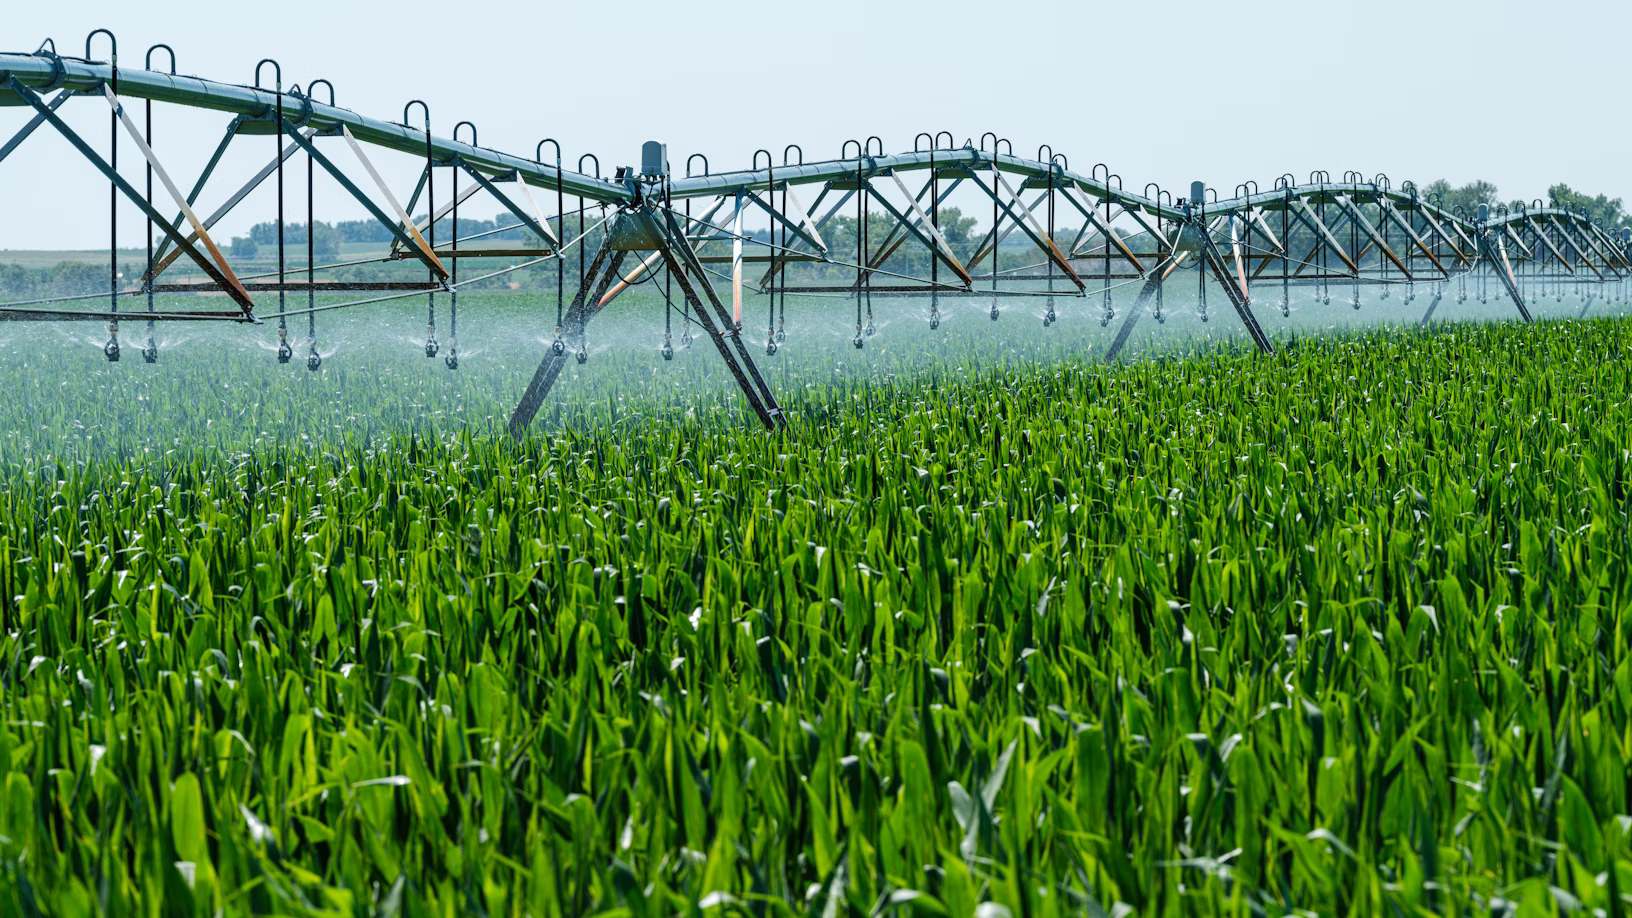 A sprinkler system spraying water on a green field